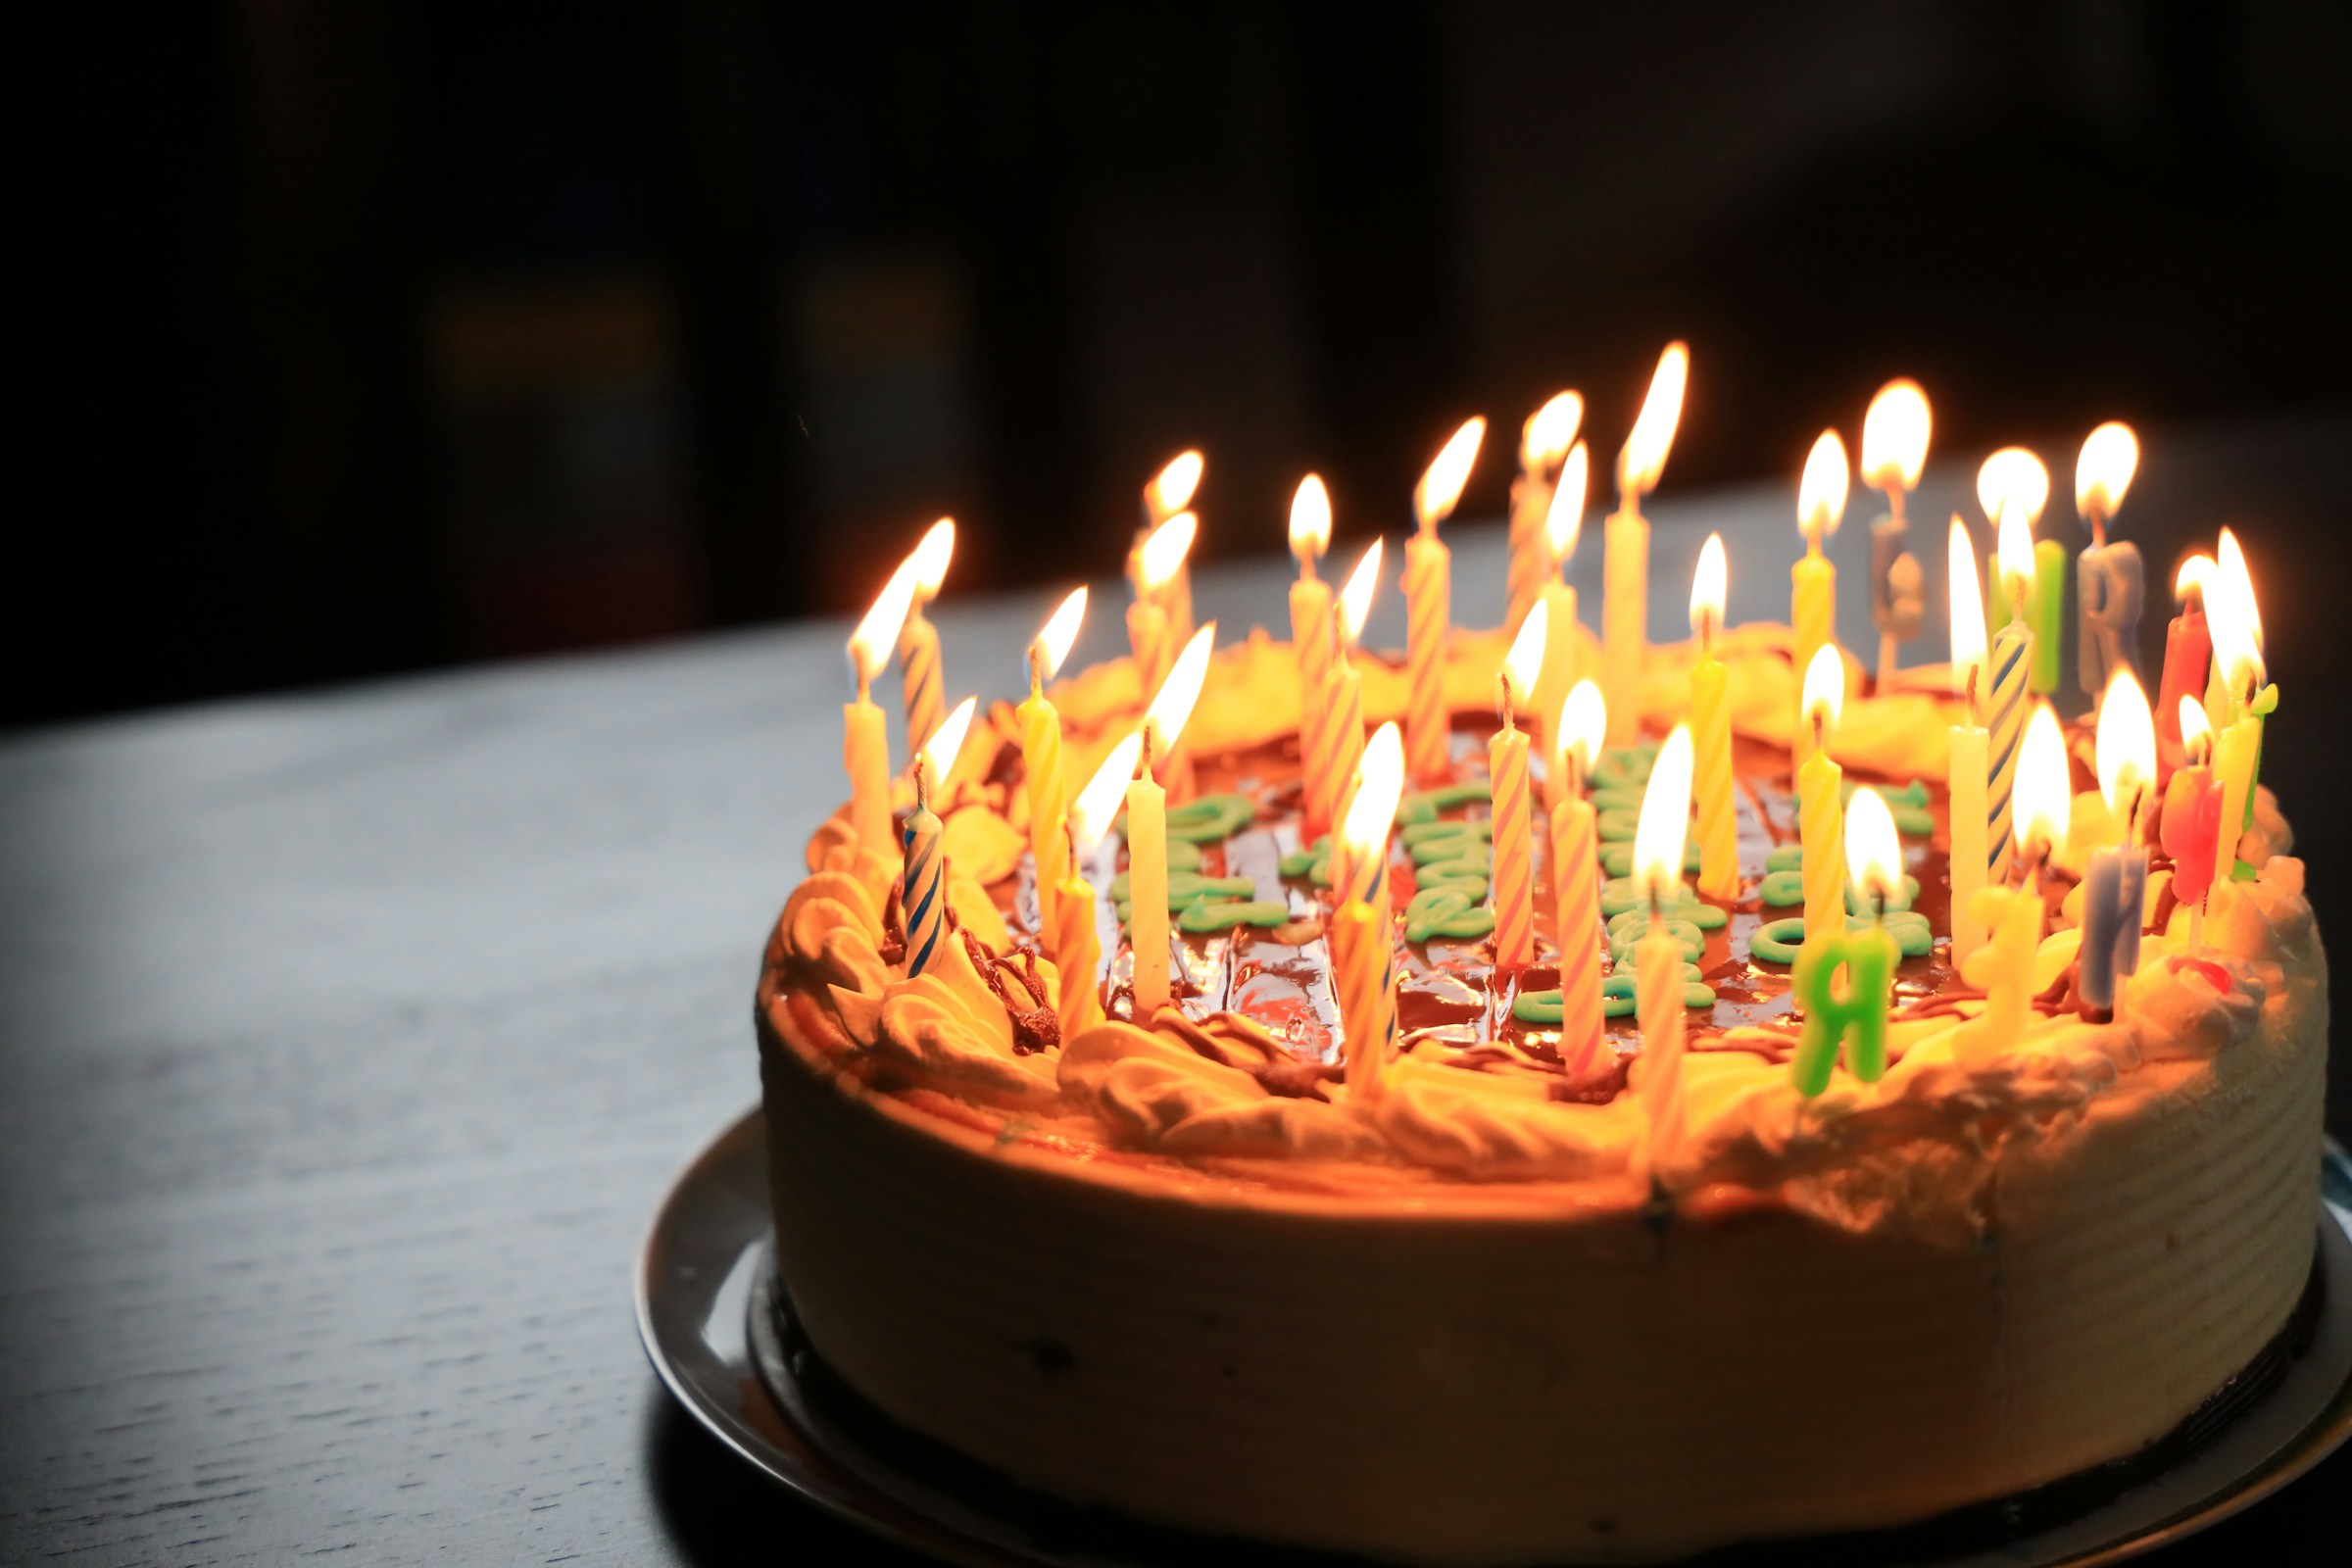 Birthday cake with candles | Source: Unsplash